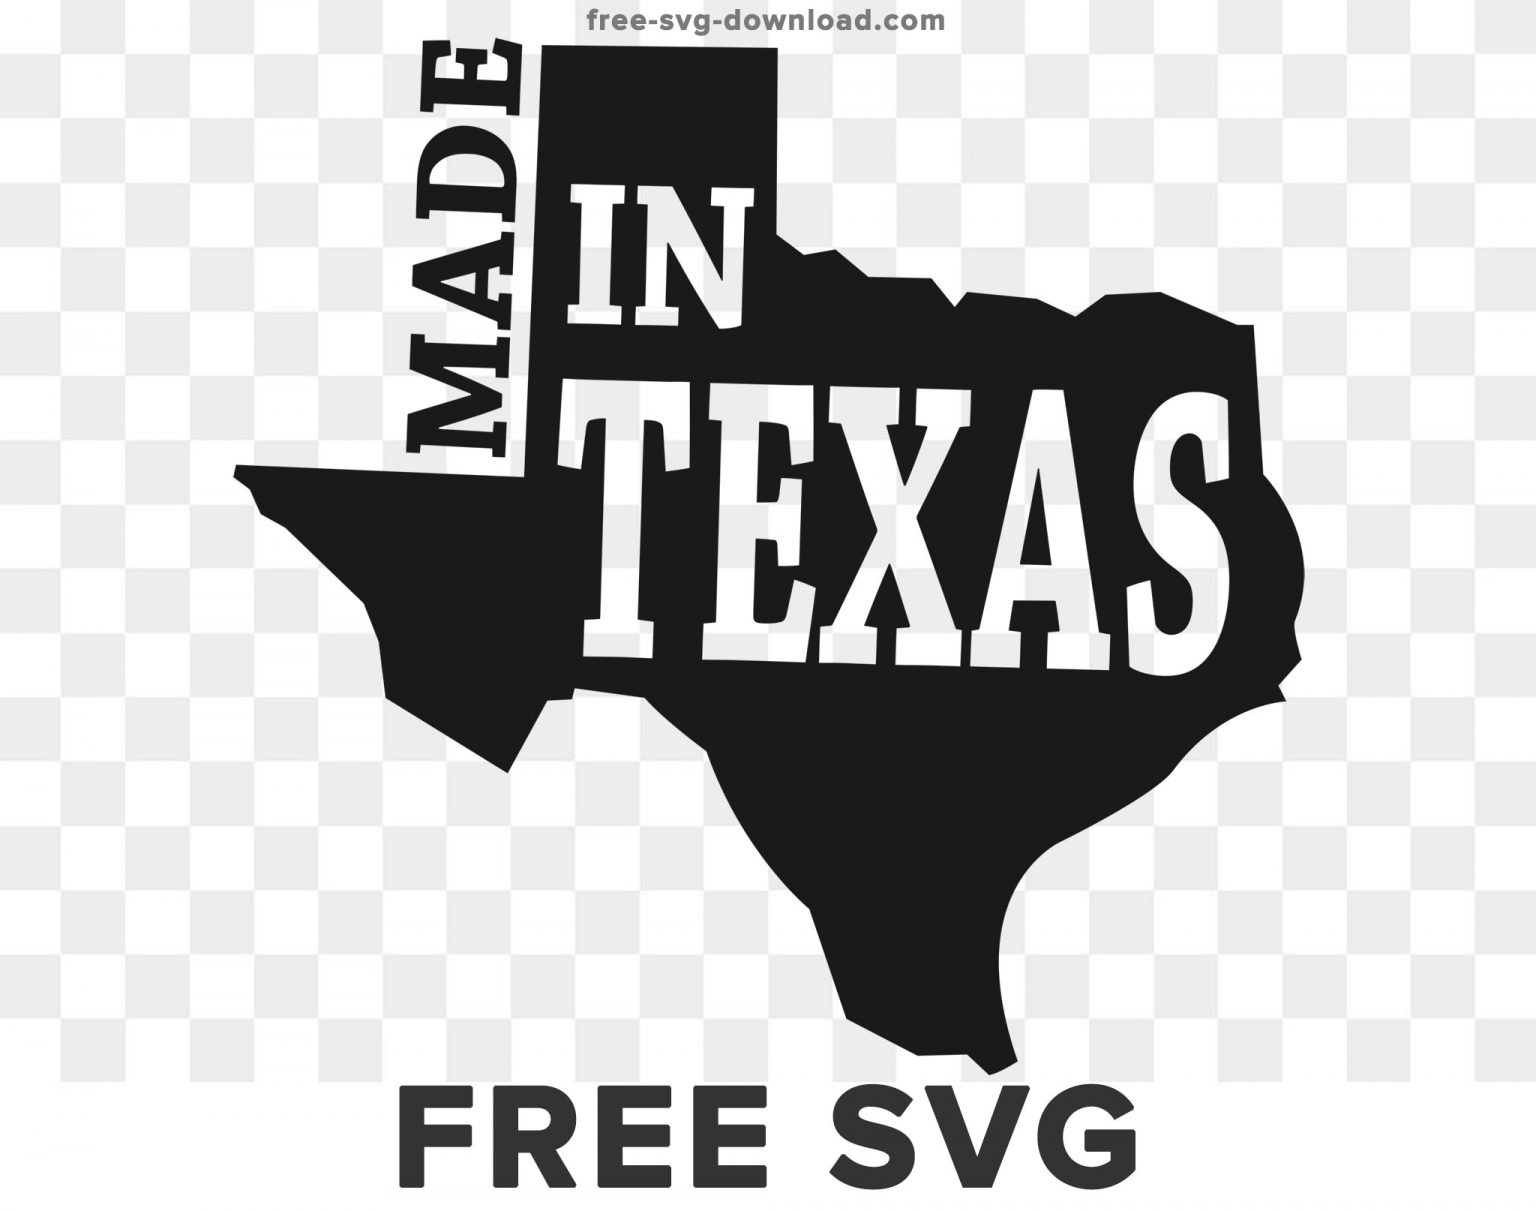 Made in Texas Svg | Free SVG Download